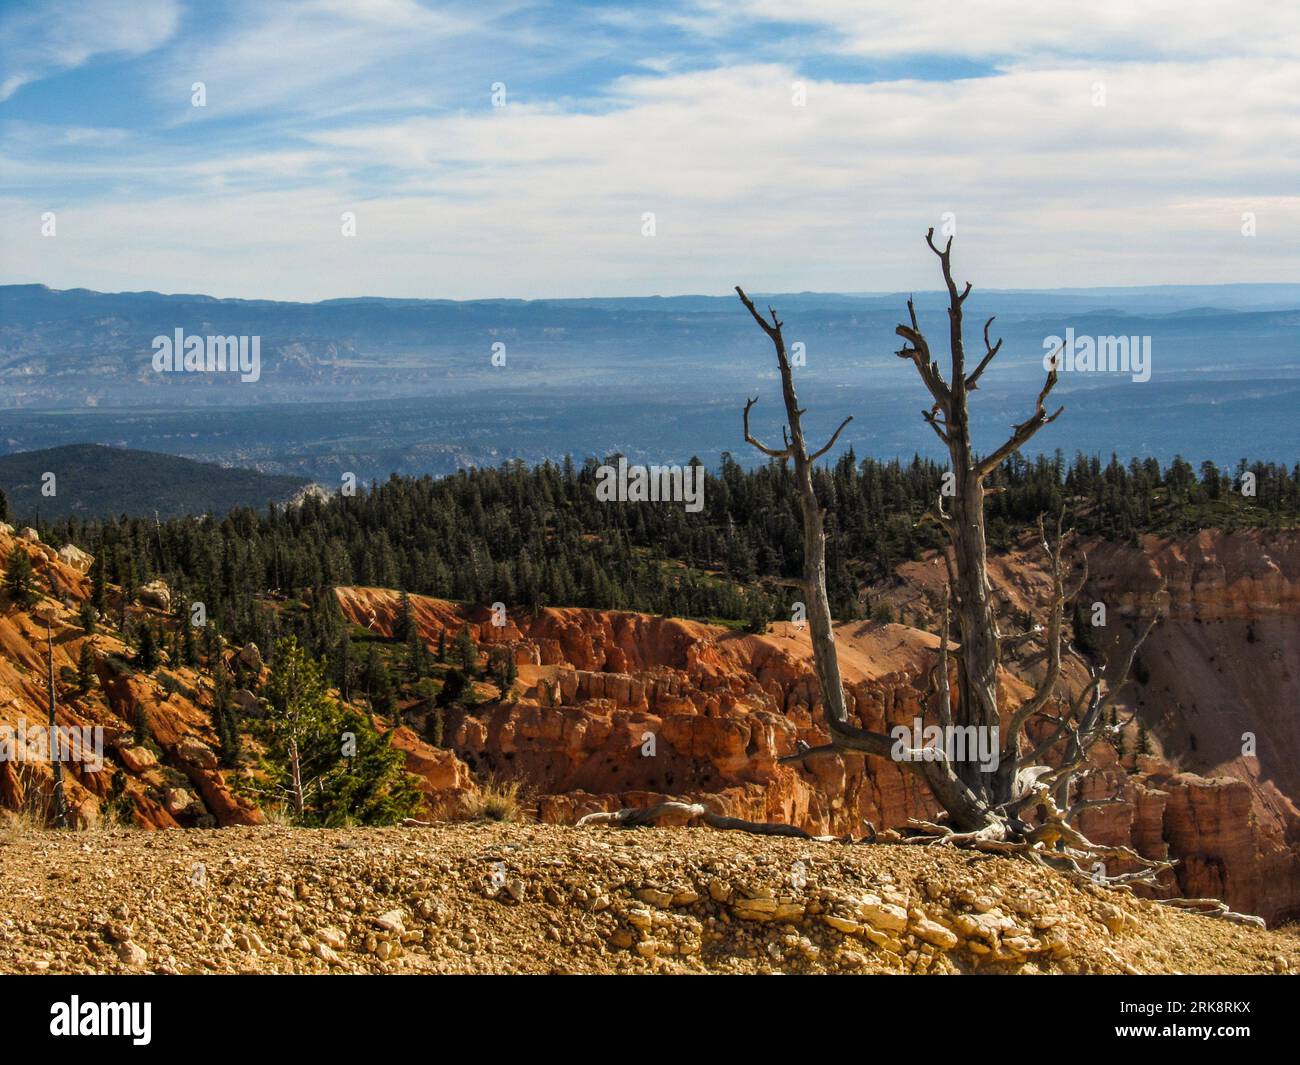 View over the hoodoos and forested slopes of Bryce Canyon, with a dead tree in the Foreground Stock Photo